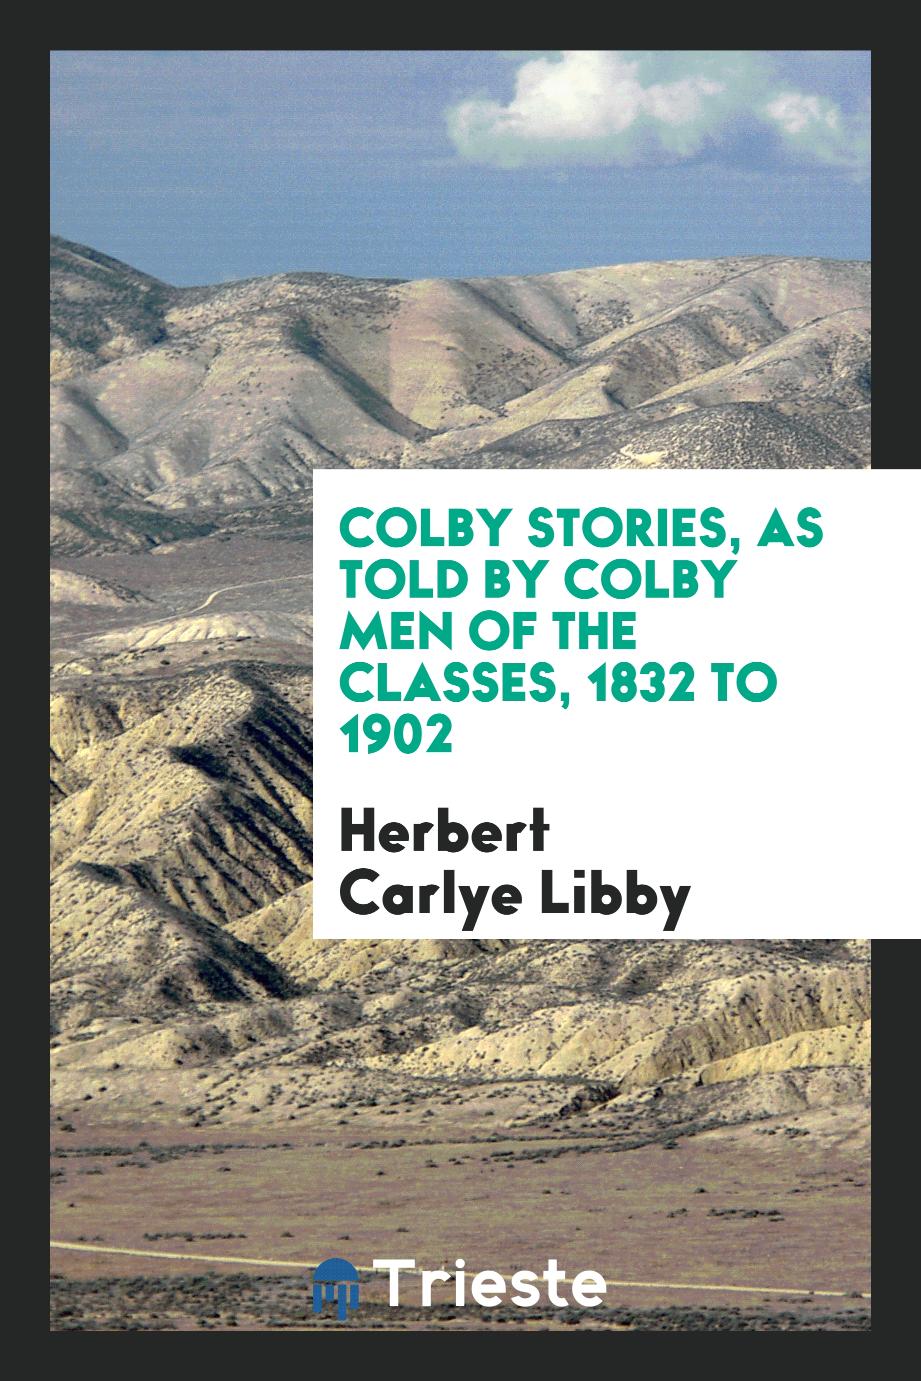 Colby stories, as told by Colby men of the classes, 1832 to 1902